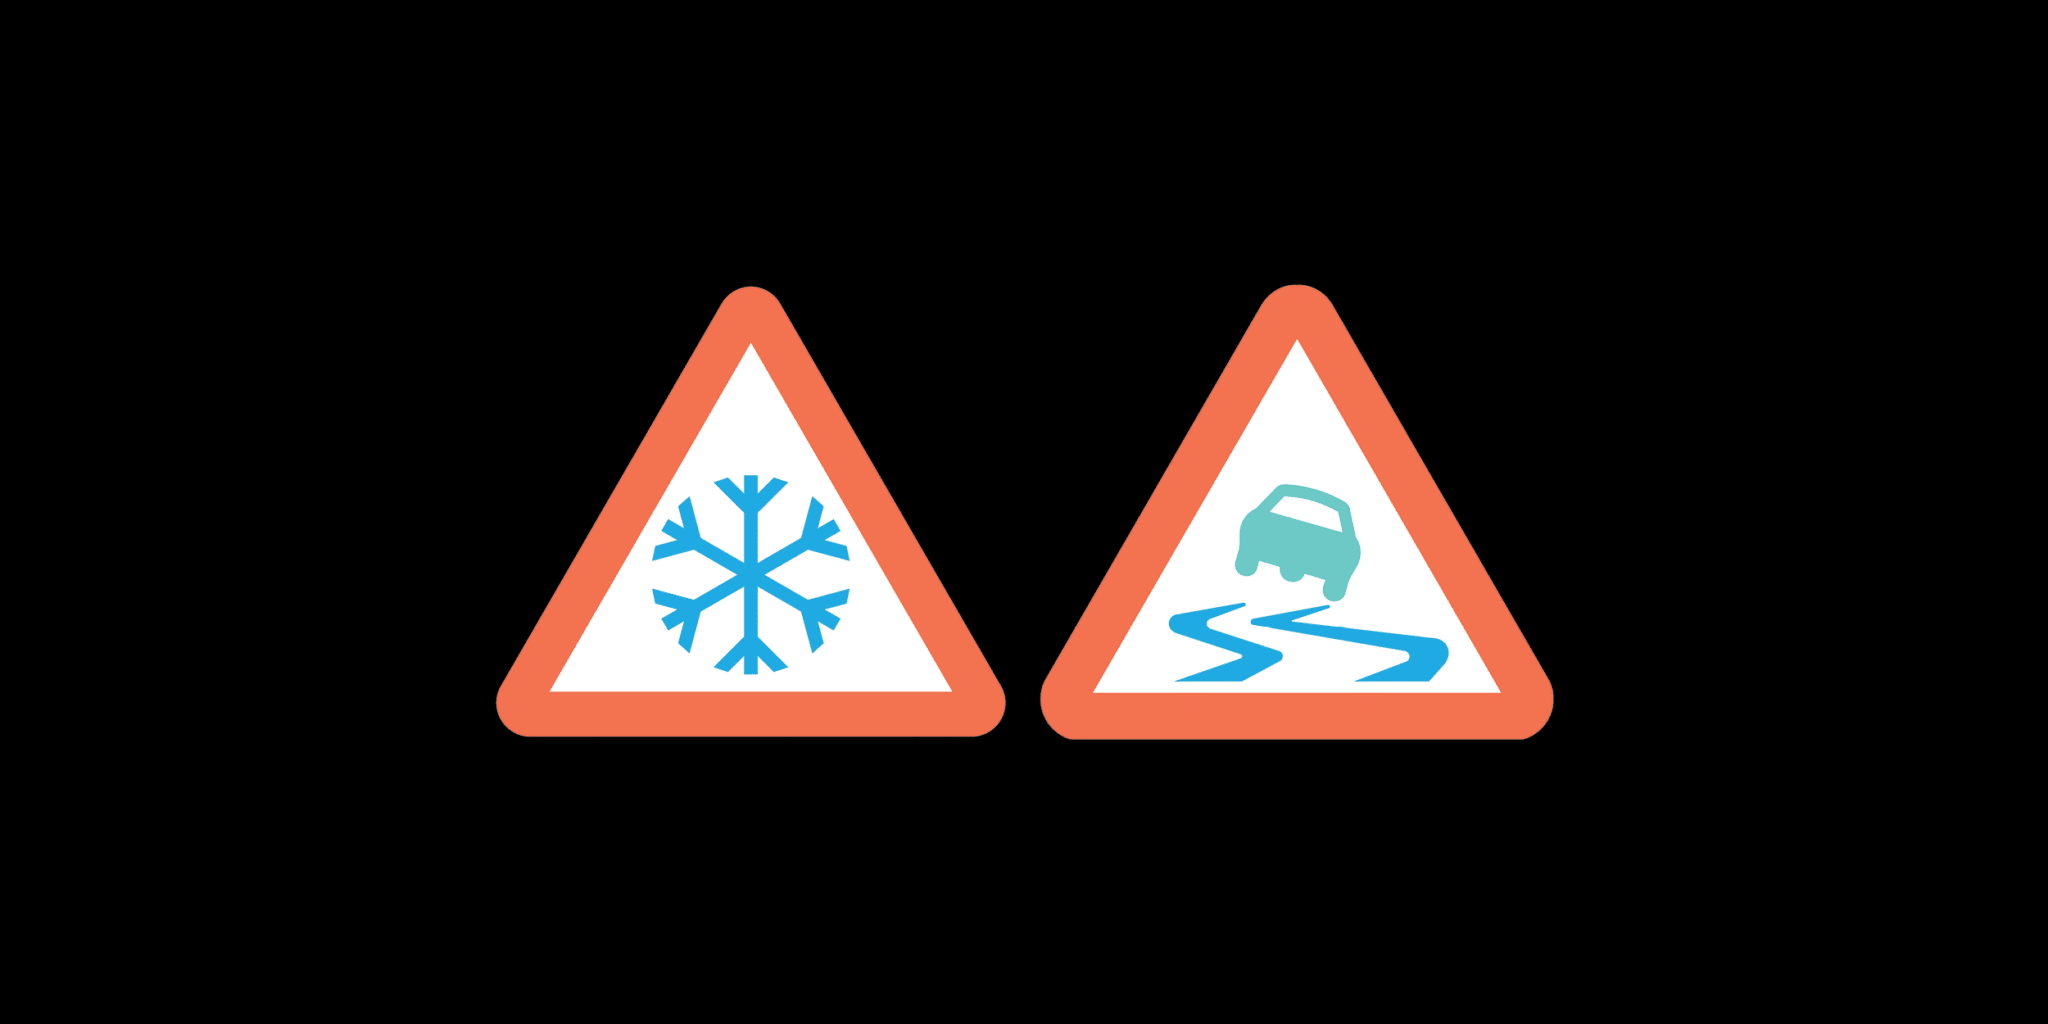 If we take the risk on the icy street or in business, we will face ditches